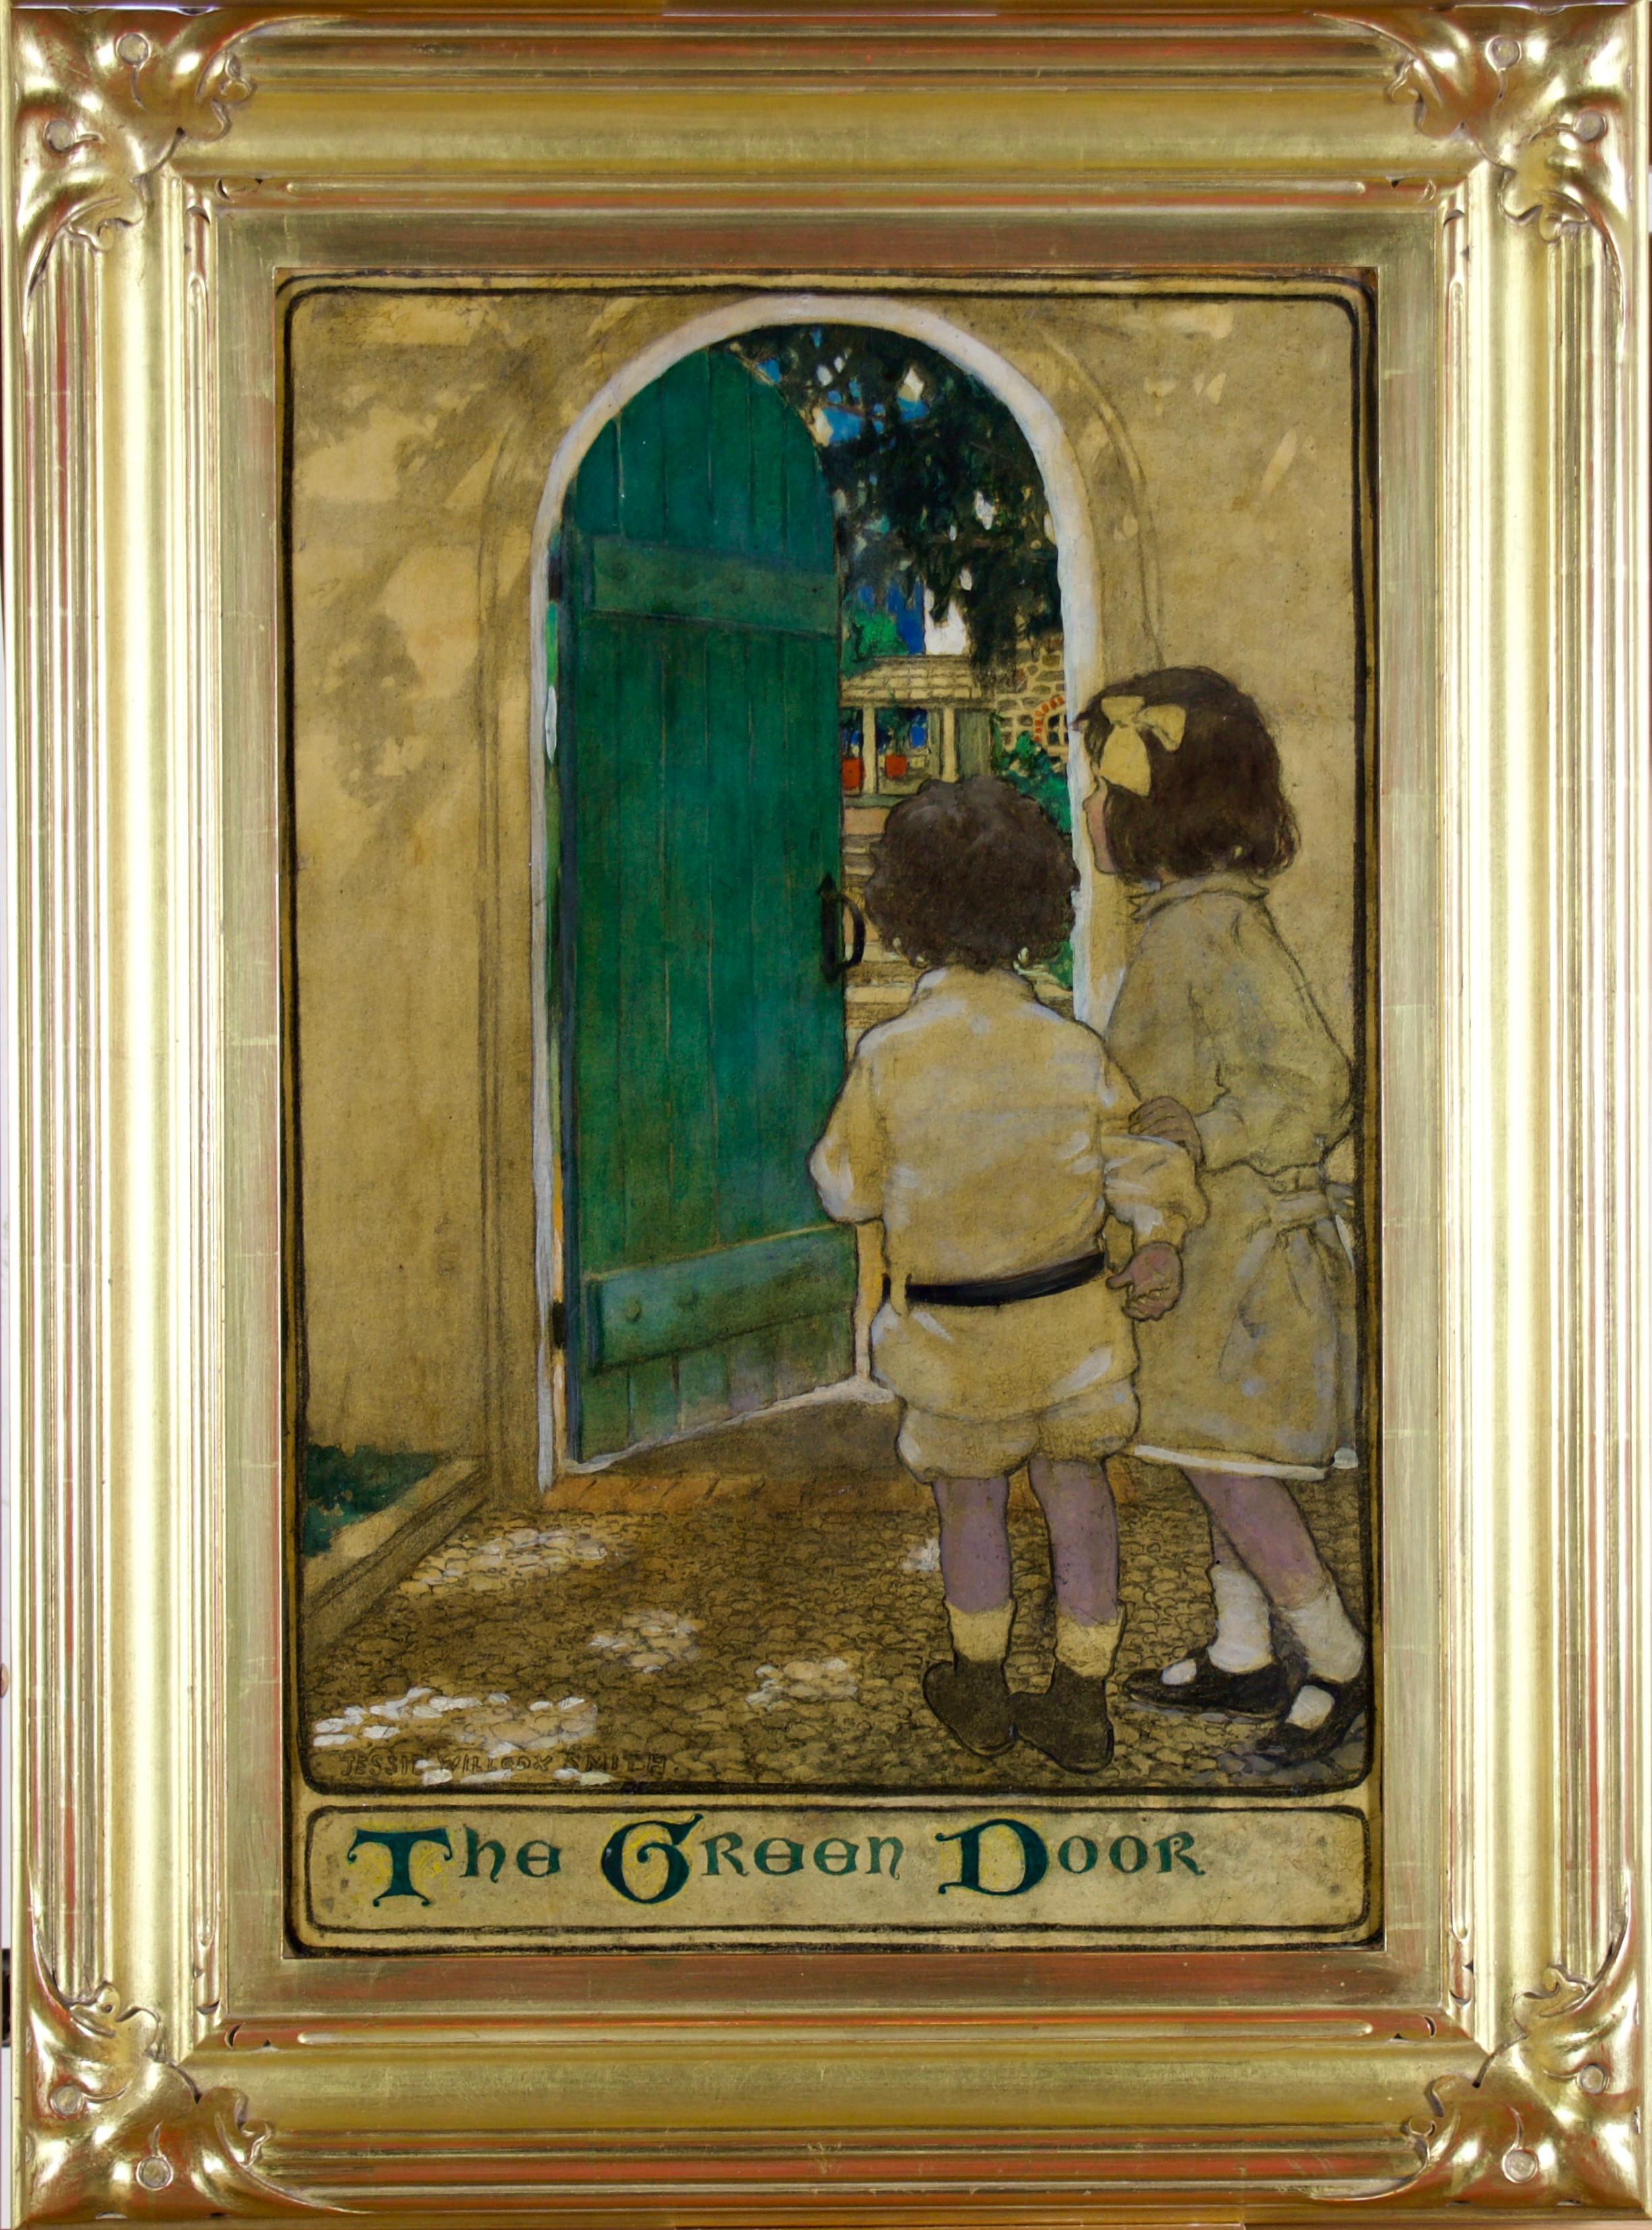 The Green Door - Painting by Jessie Willcox Smith